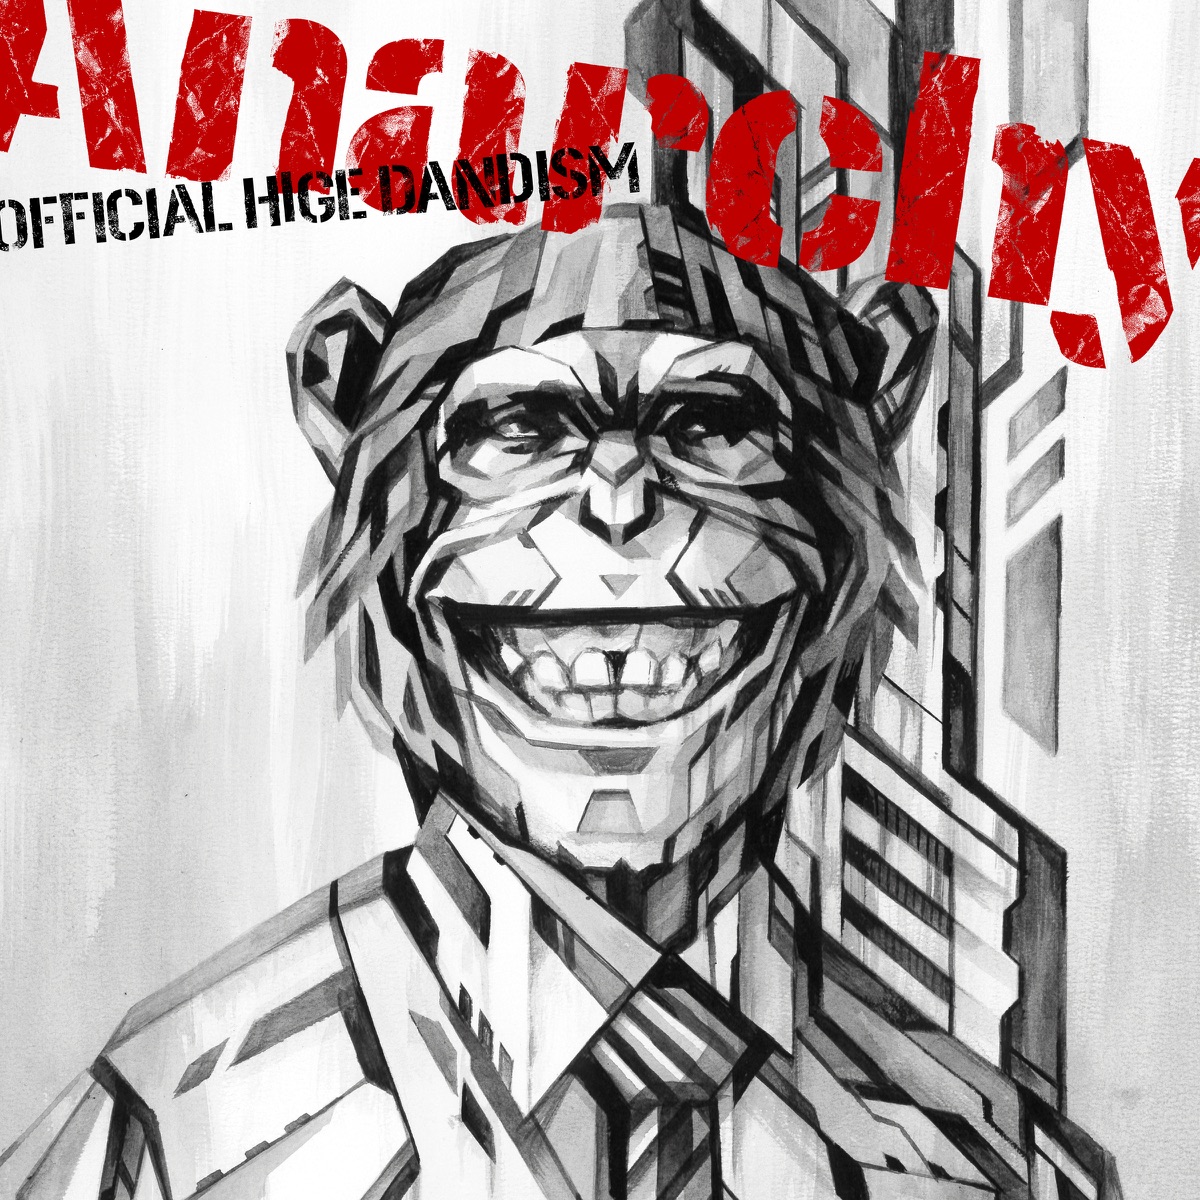 Cover for『Official HIGE DANdism - Anarchy』from the release『Anarchy』